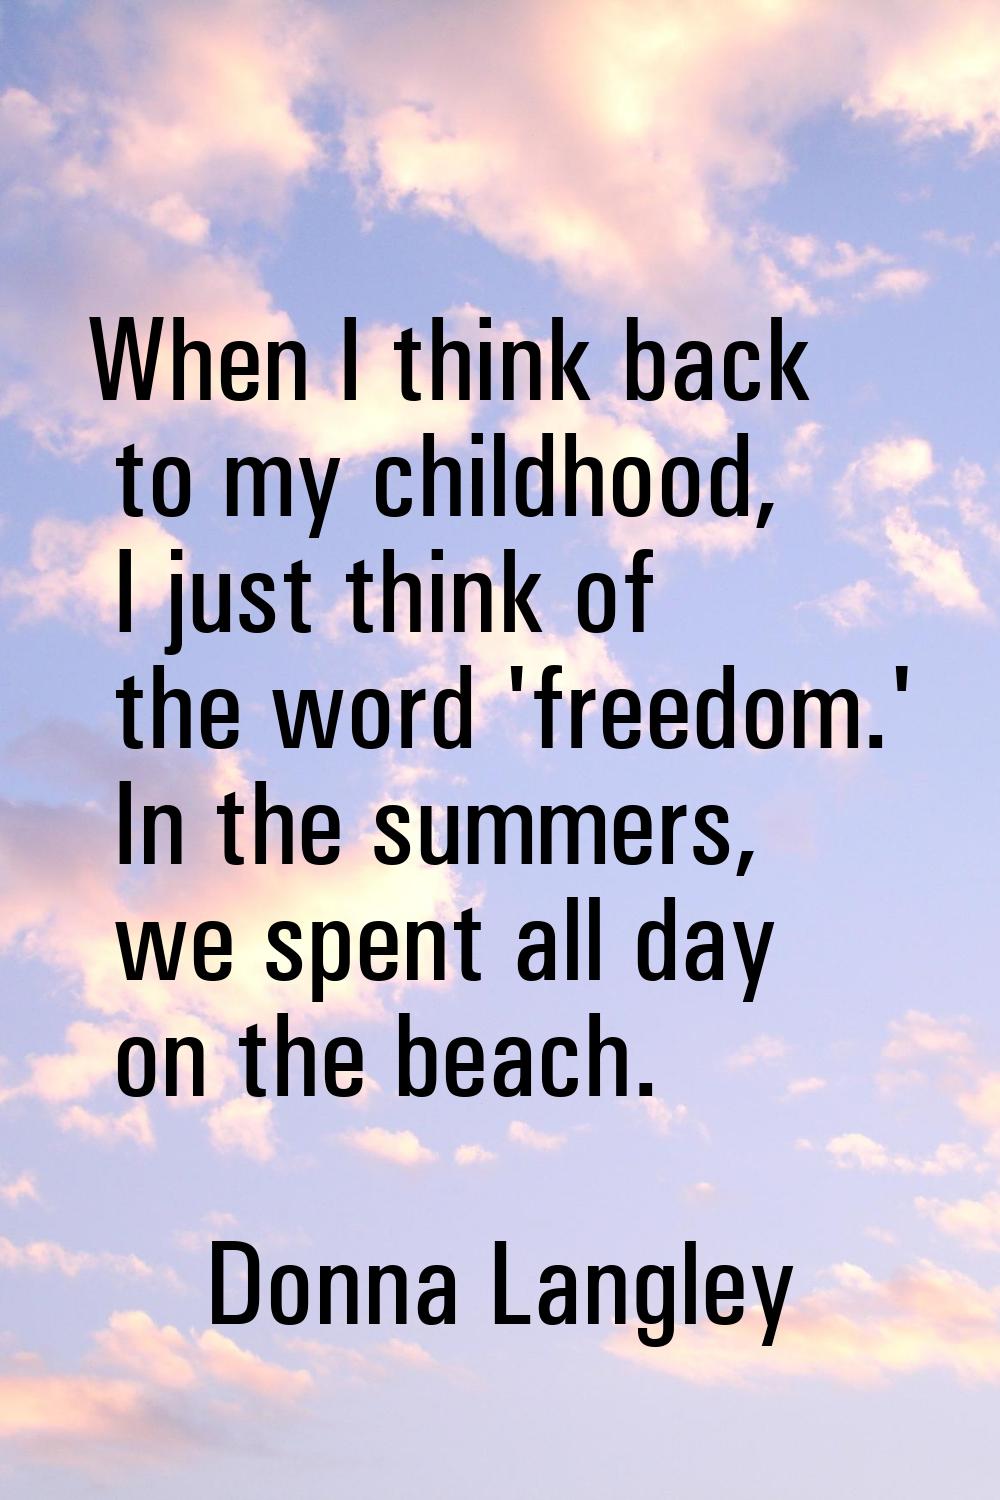 When I think back to my childhood, I just think of the word 'freedom.' In the summers, we spent all